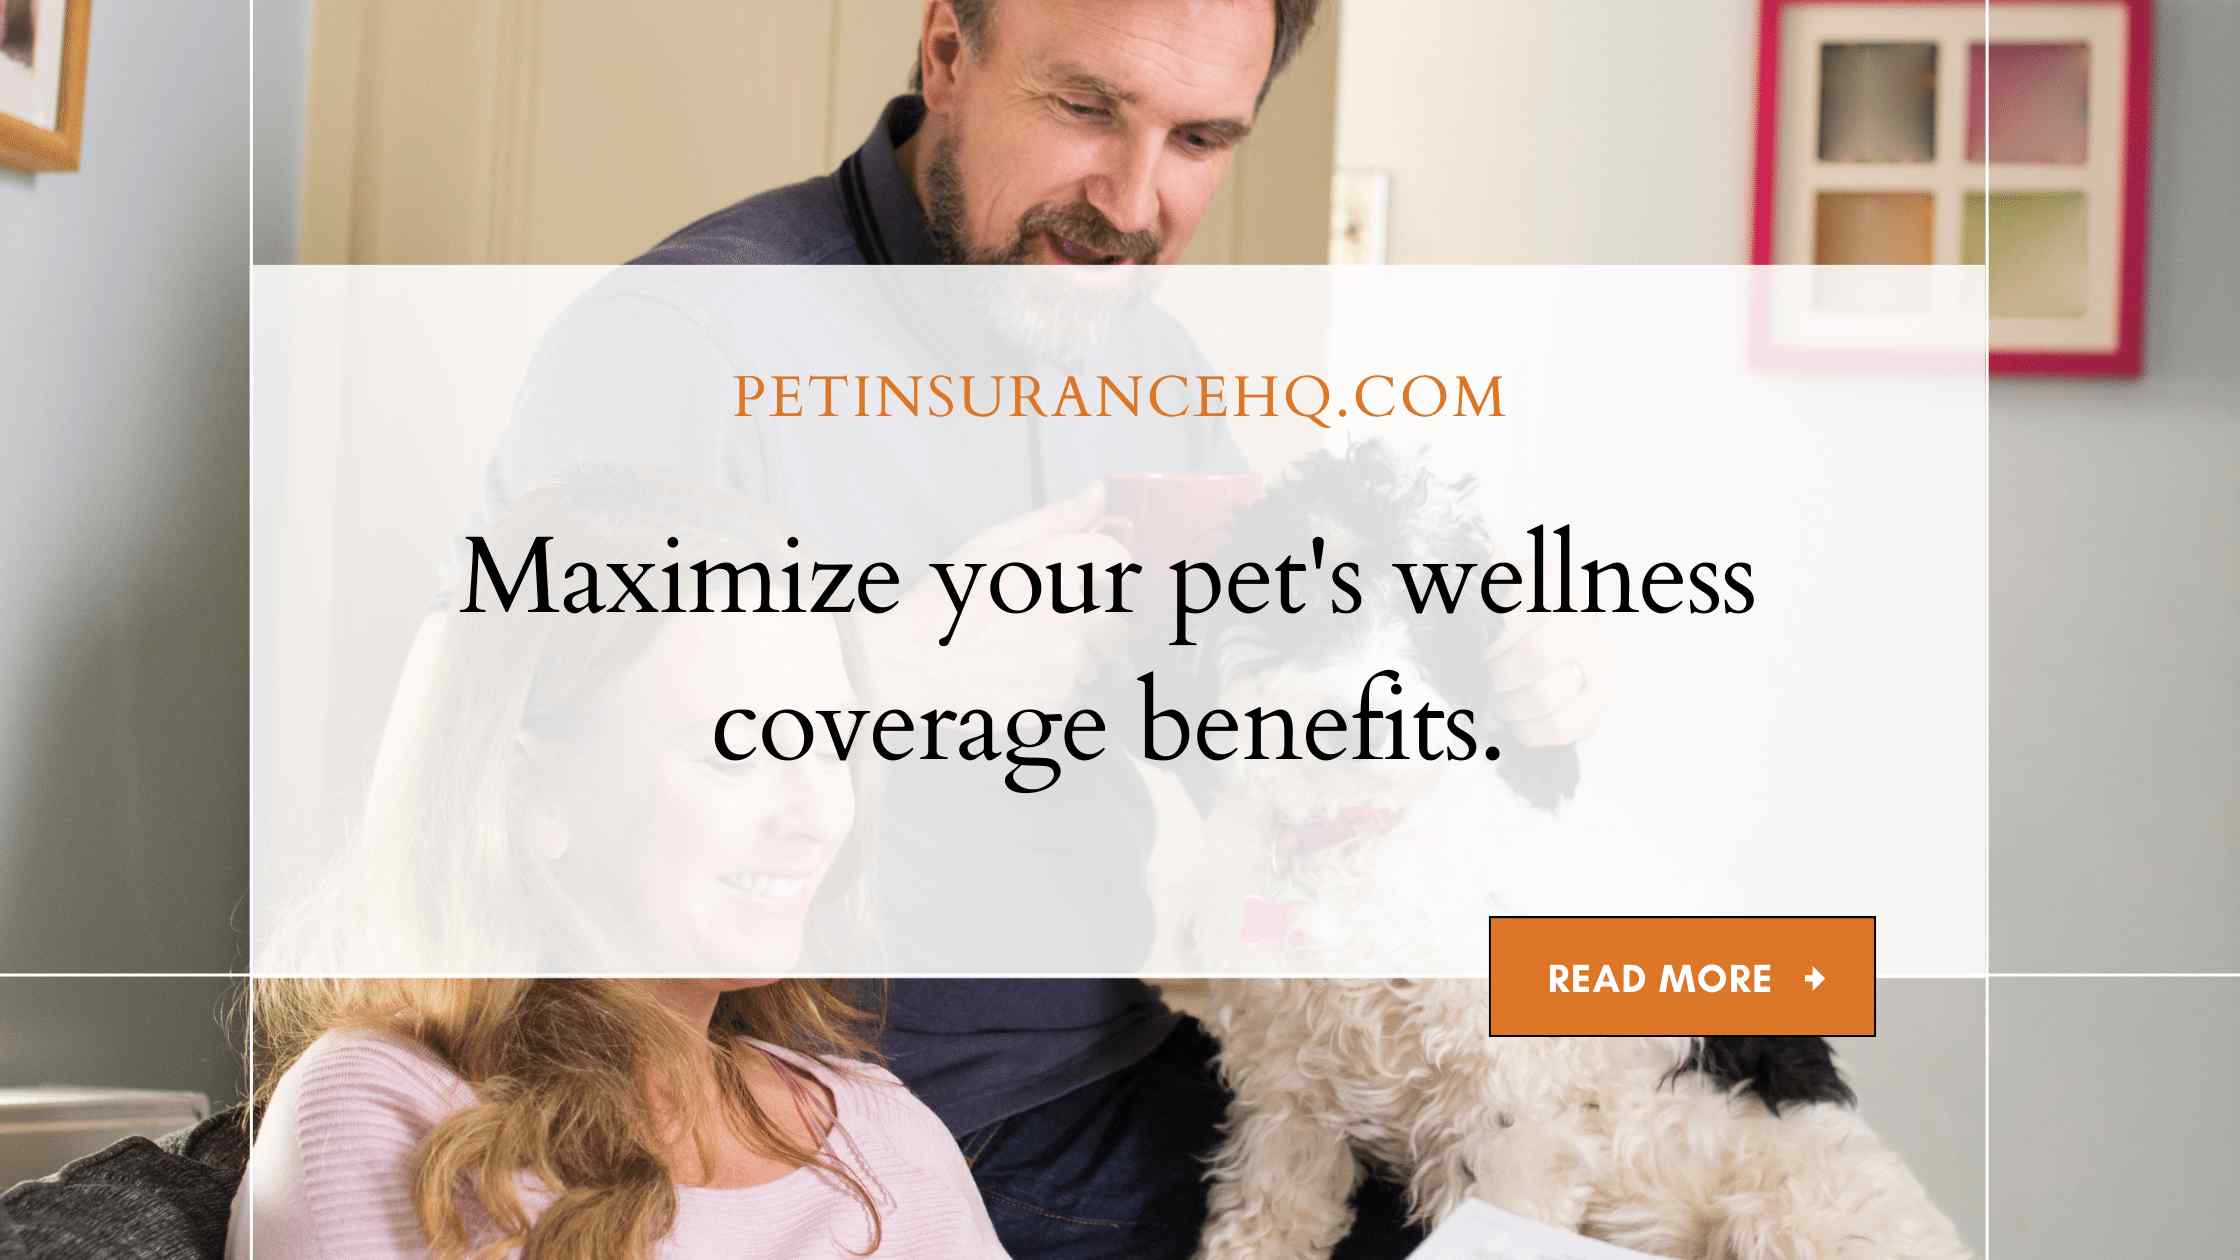 How to maximize your pet’s wellness coverage benefits